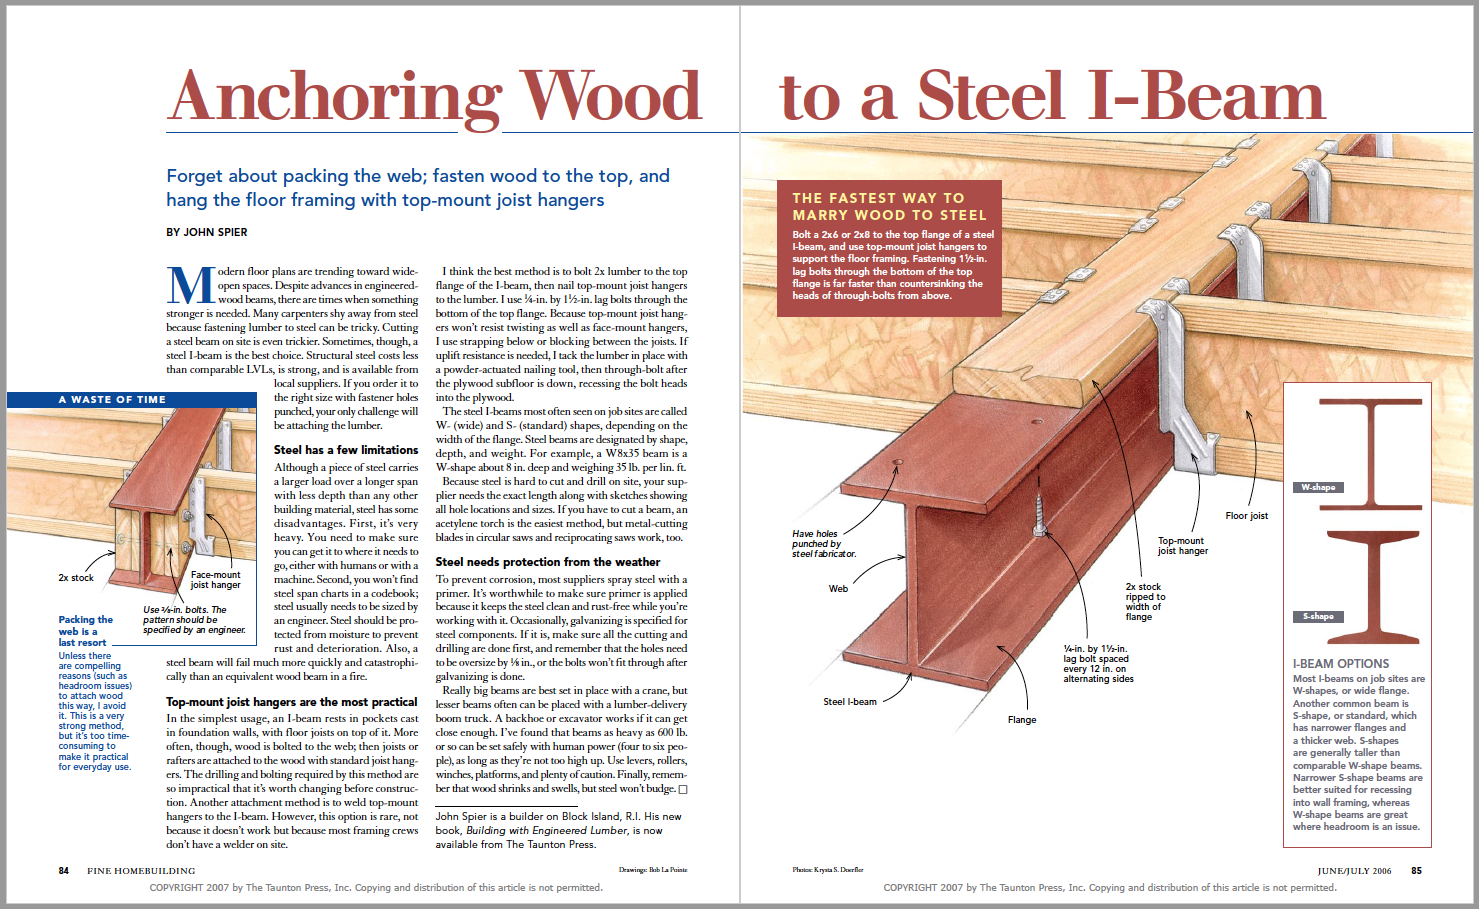 Anchoring Wood to a Steel I-Beam spread image